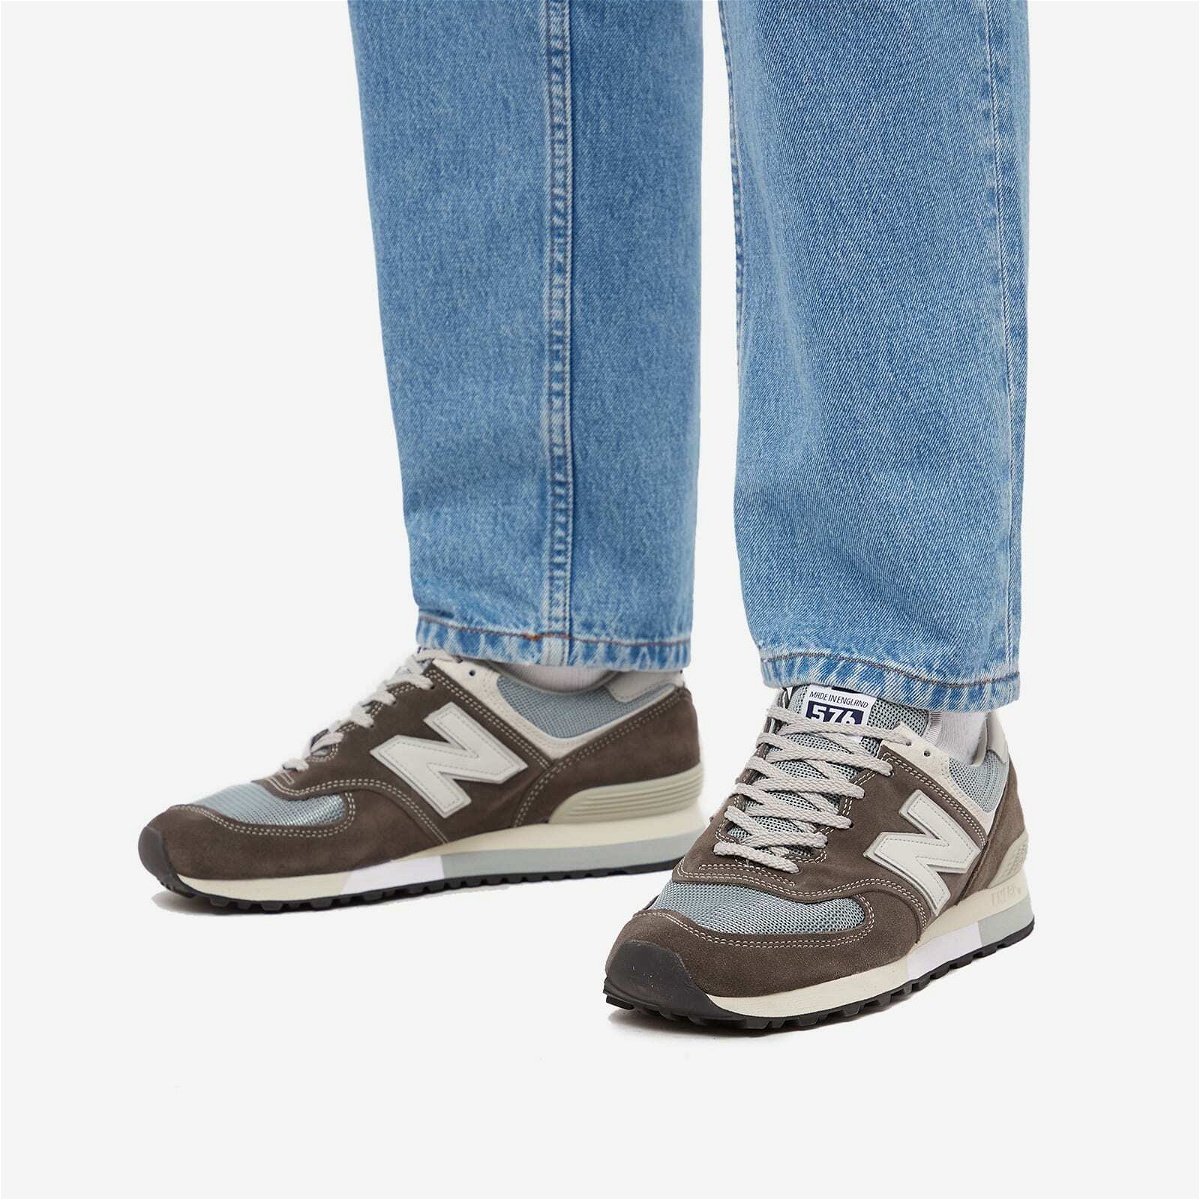 New Balance Men's OU576AGG - Made in England Sneakers in Grey